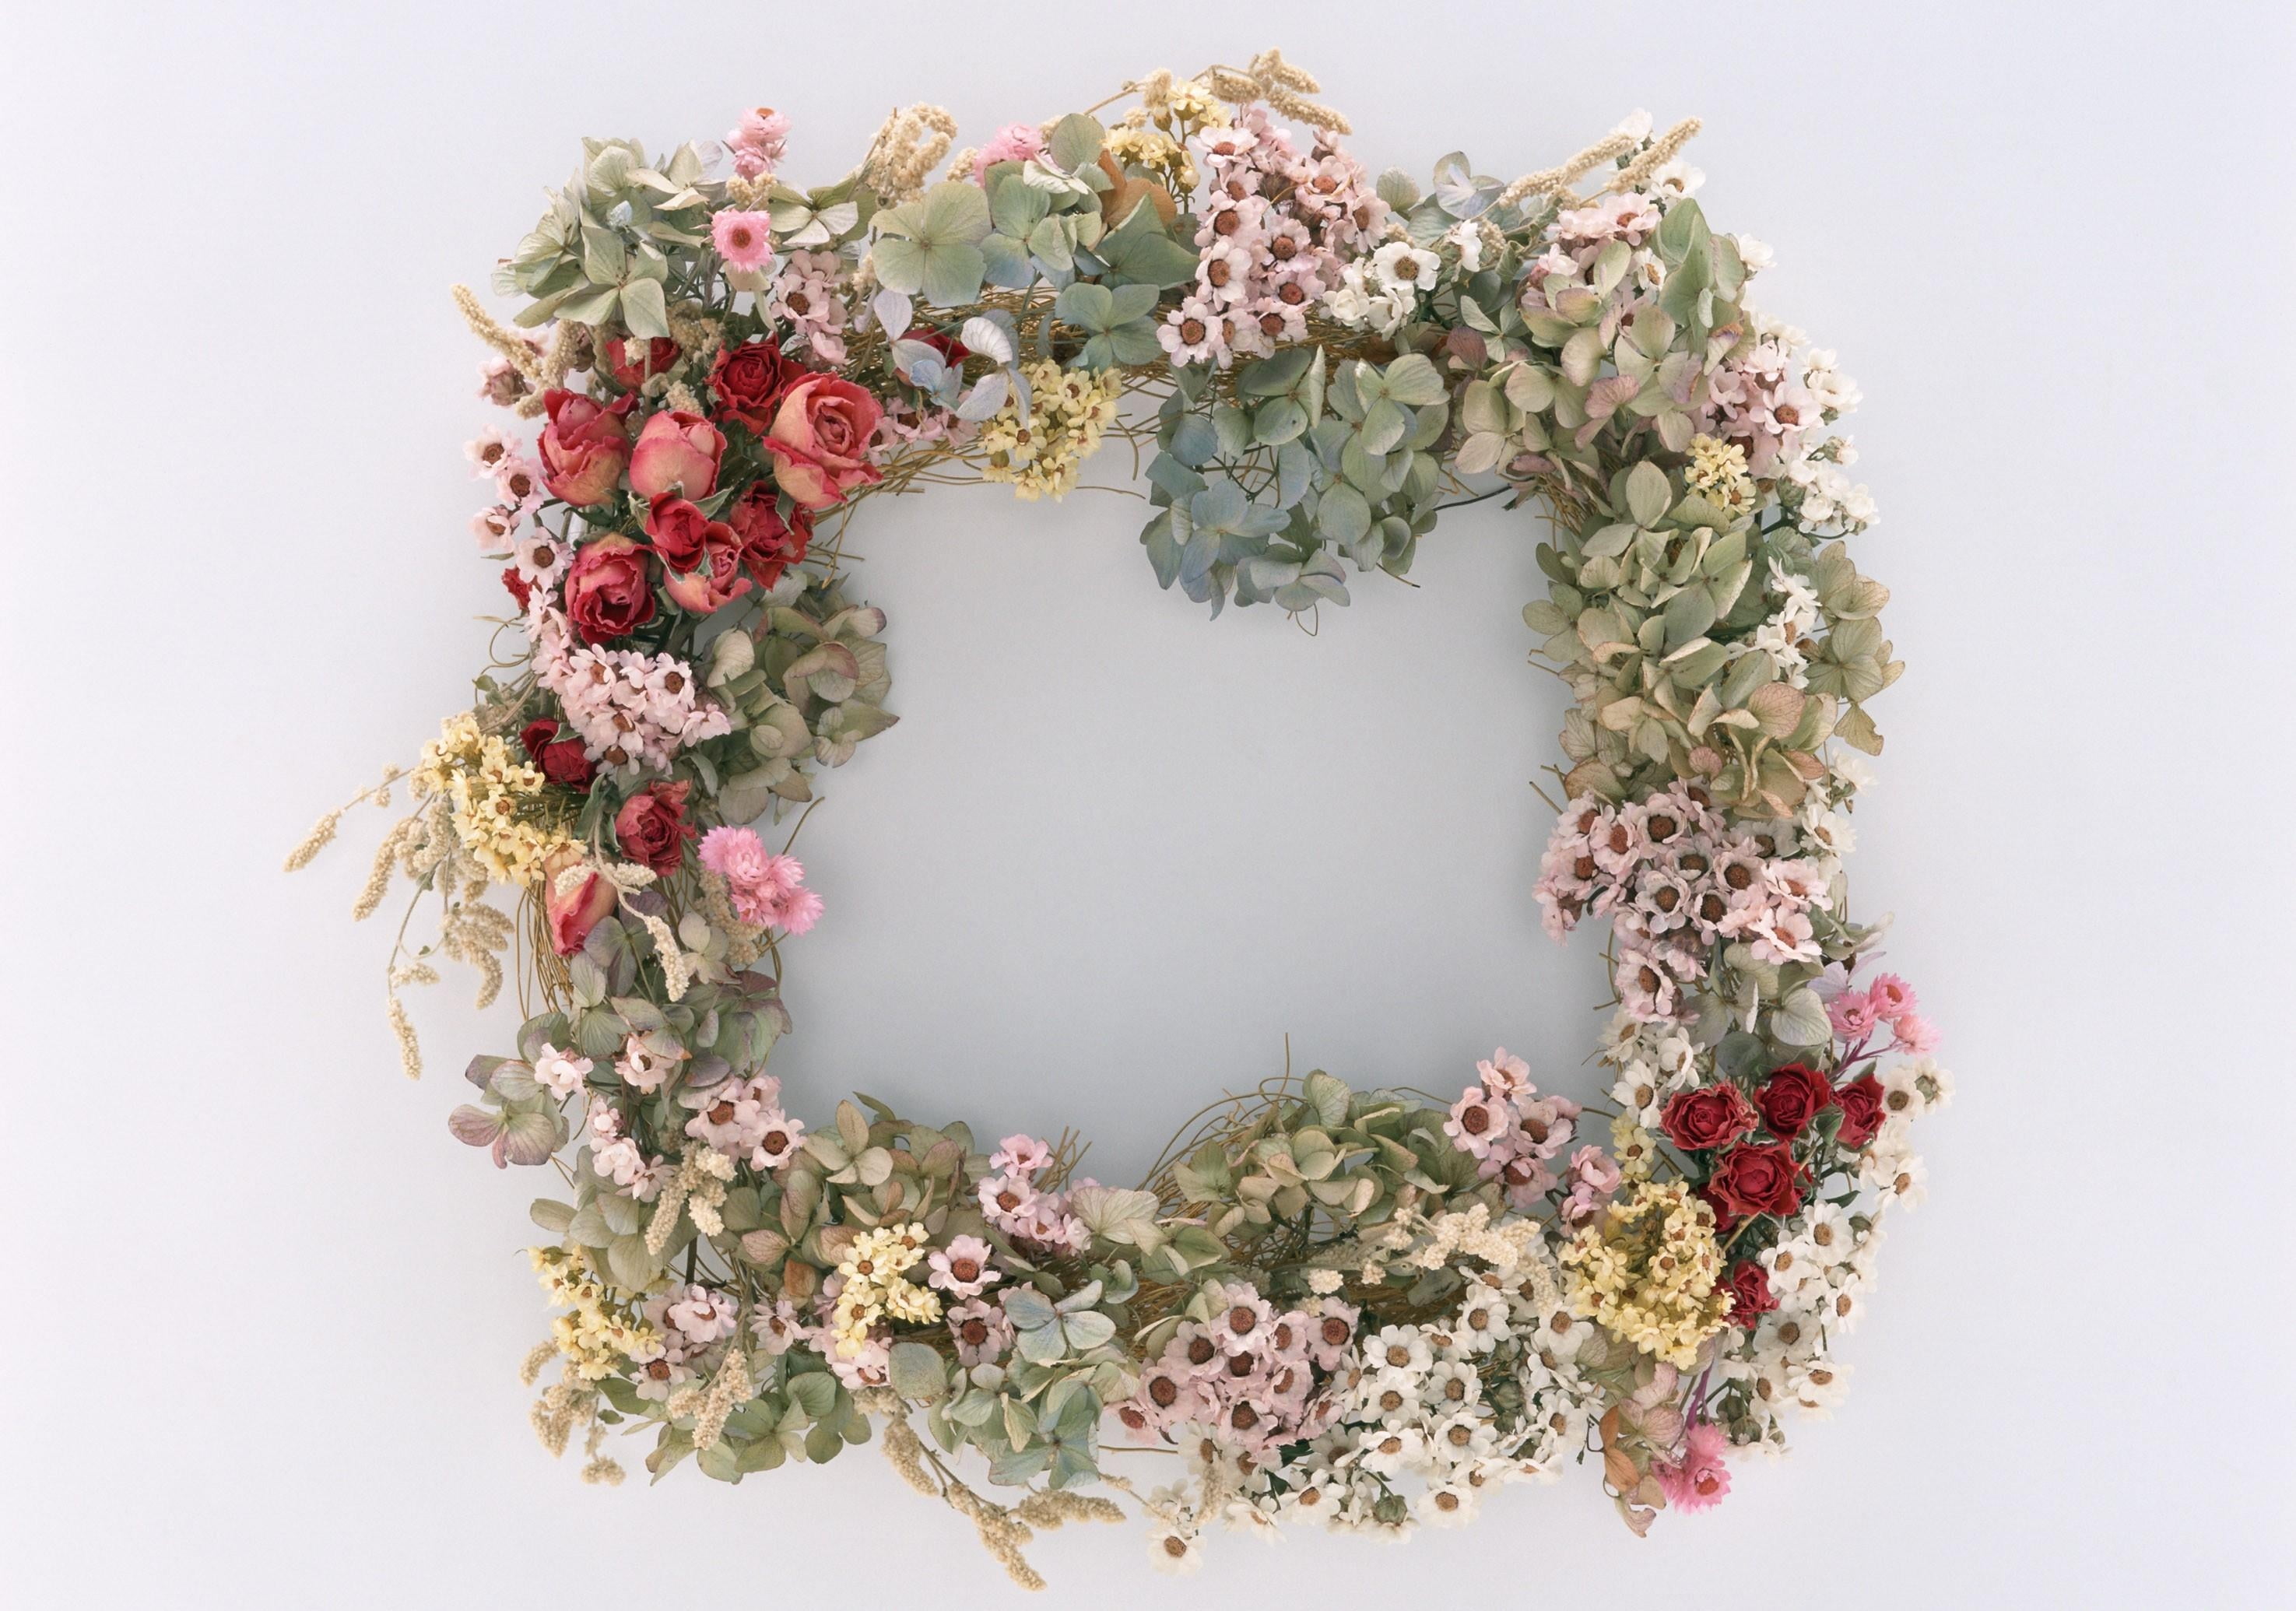 green and red floral wreath, roses, flowers, variety, dry, bouquet